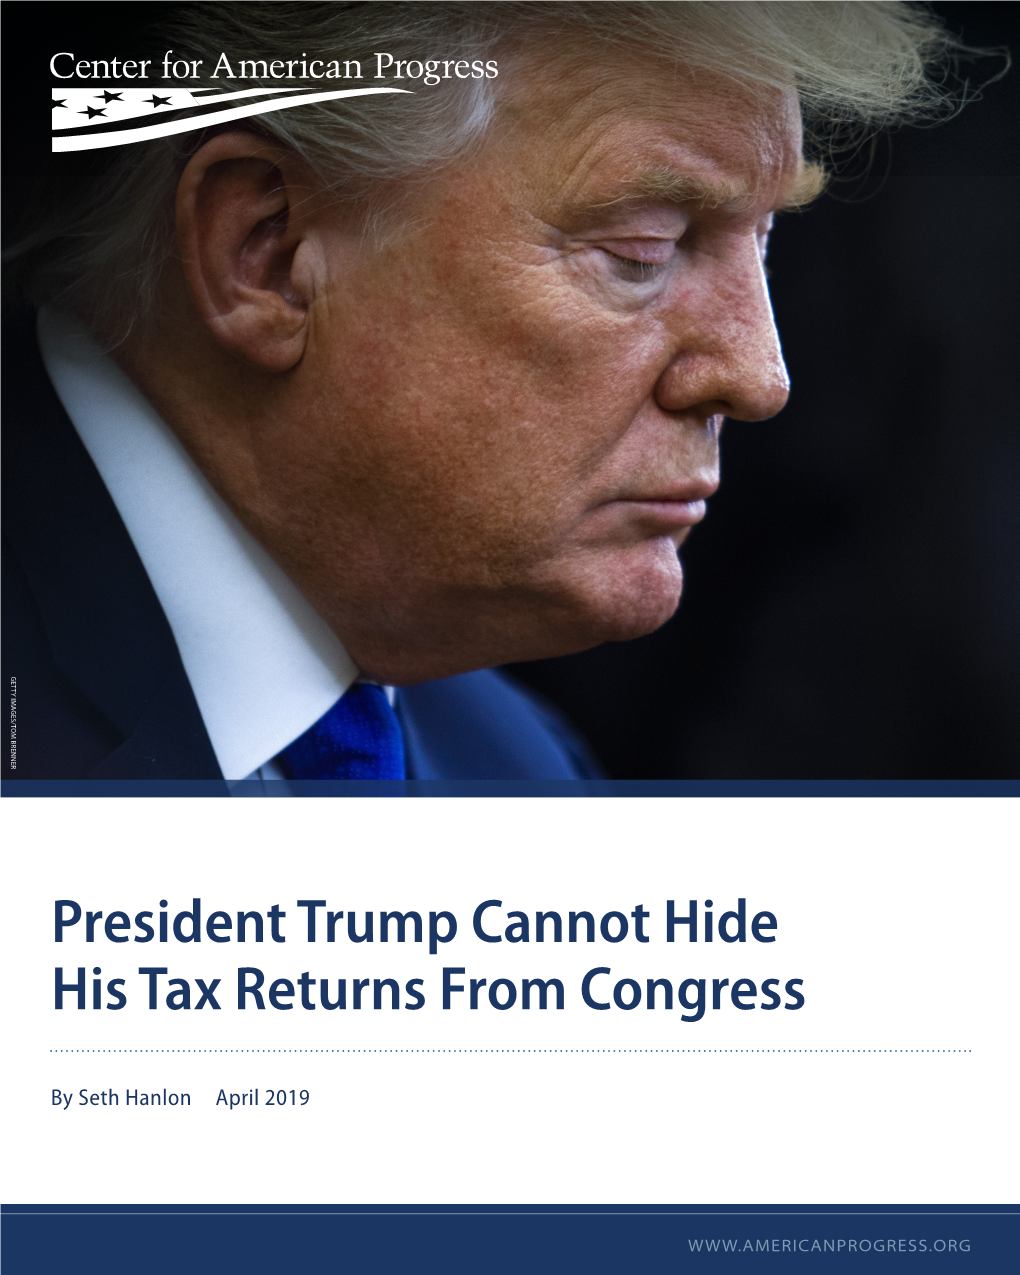 President Trump Cannot Hide His Tax Returns from Congress